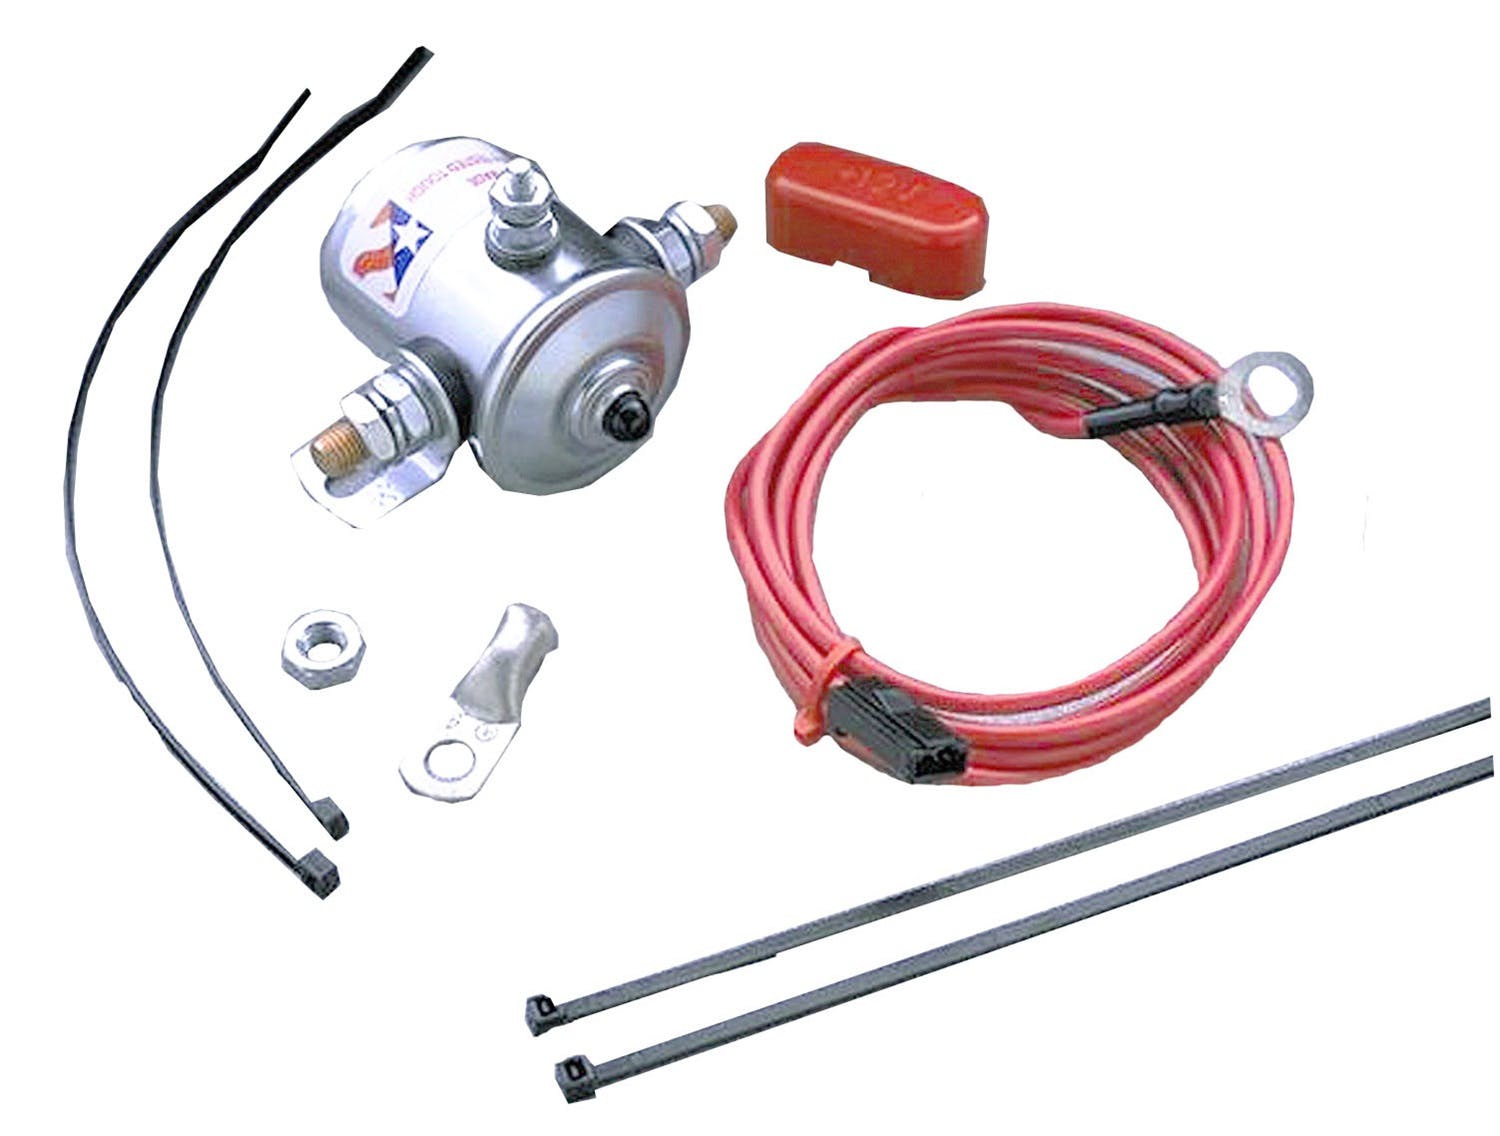 Taylor Cable Products 383480 Hot Start/Bump Start Solenoid Kit